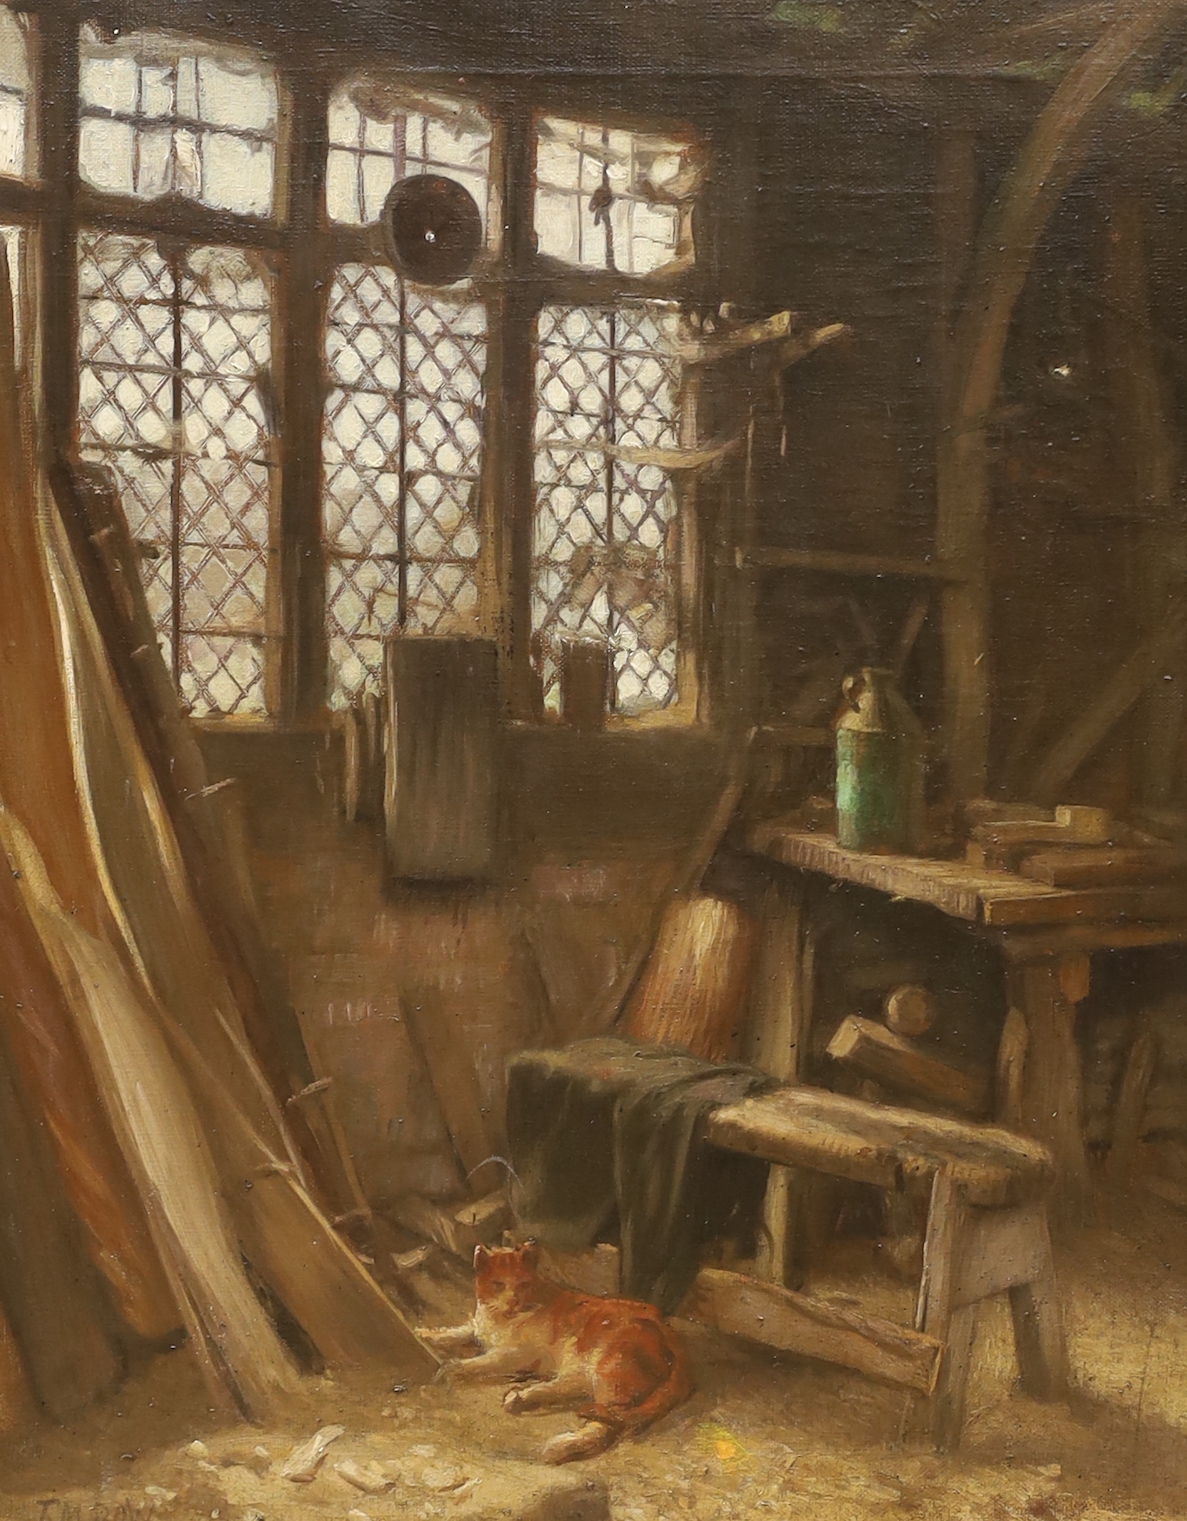 T. M. Dow, oil on canvas, Interior scene with cat, signed, 50 x 40cm, gilt framed